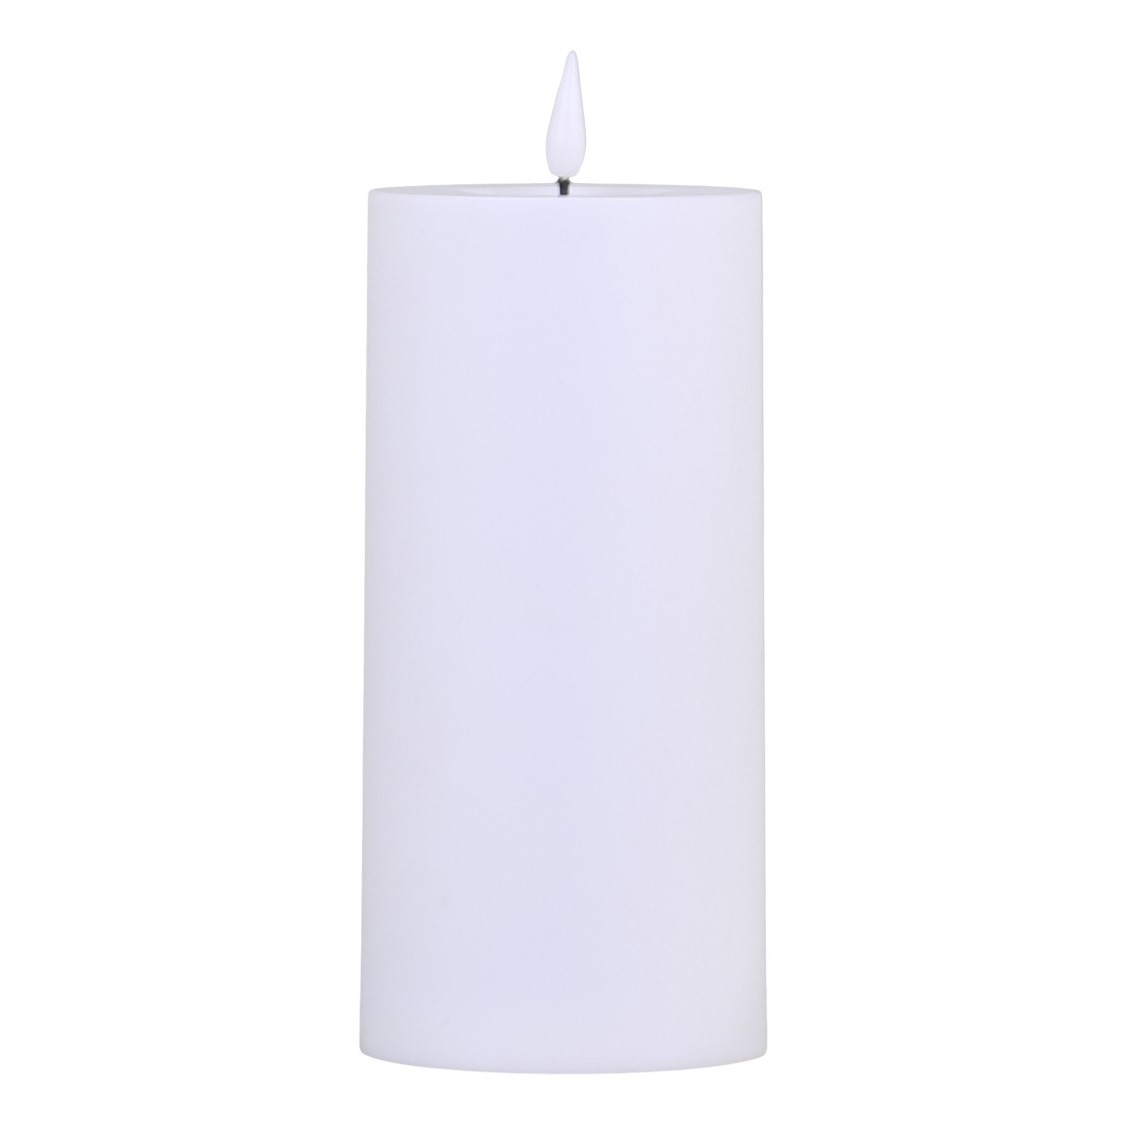 Pillar Candle LED f. outdoor incl. battery H30/D10 cm white